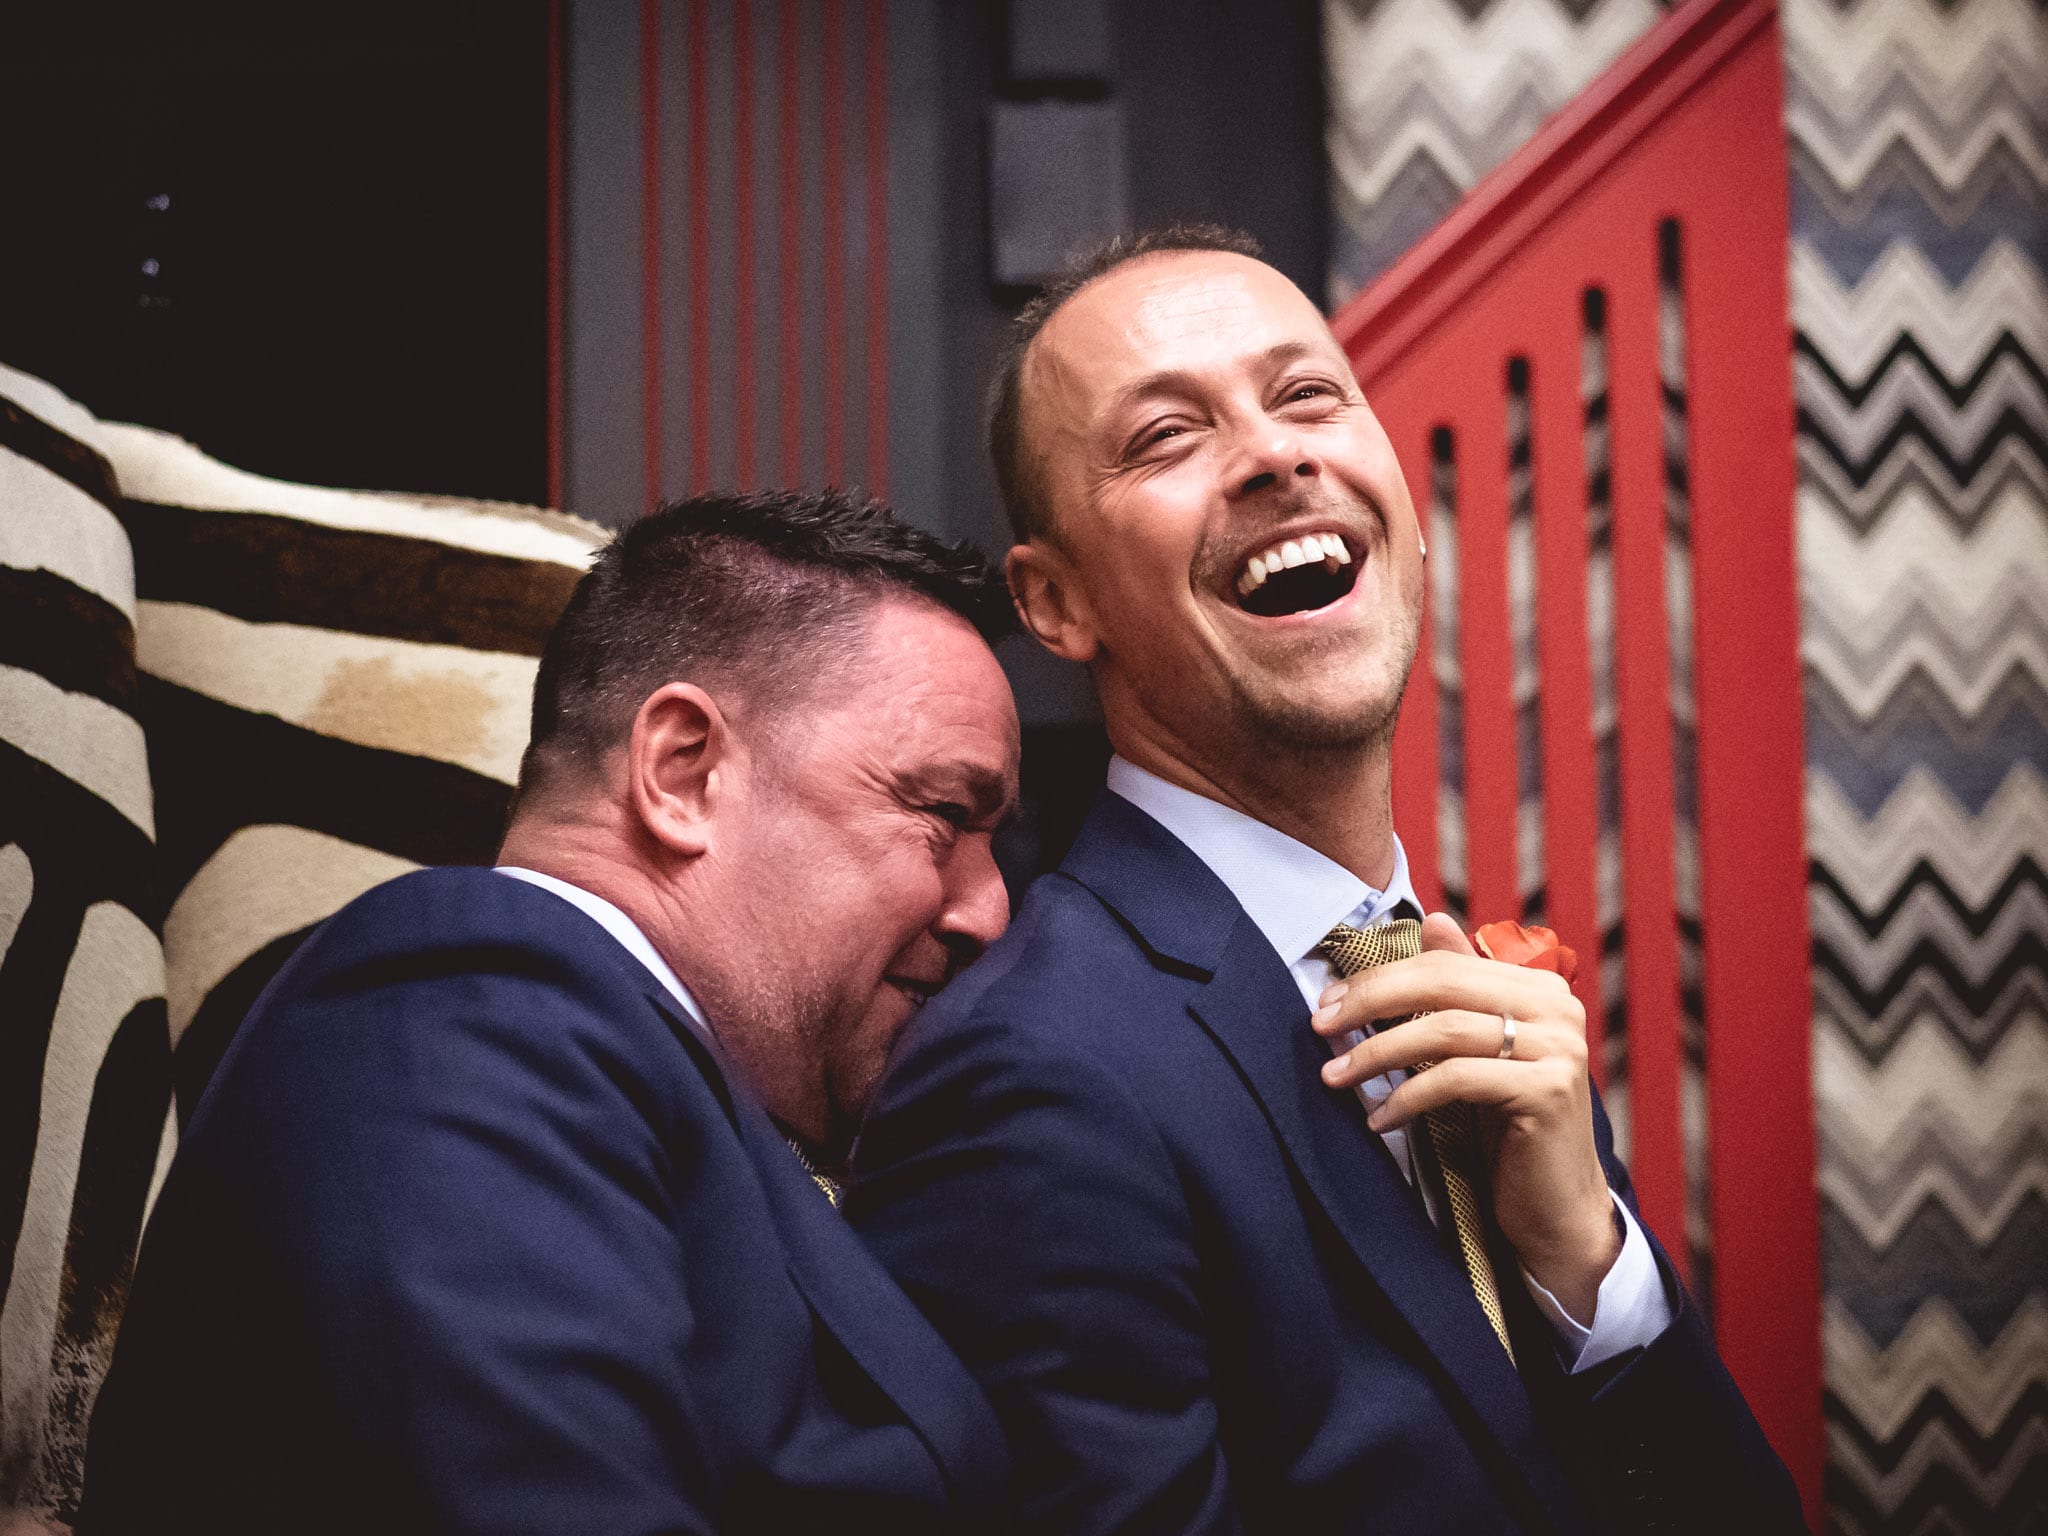 The Grooms laughing at a gay wedding in London